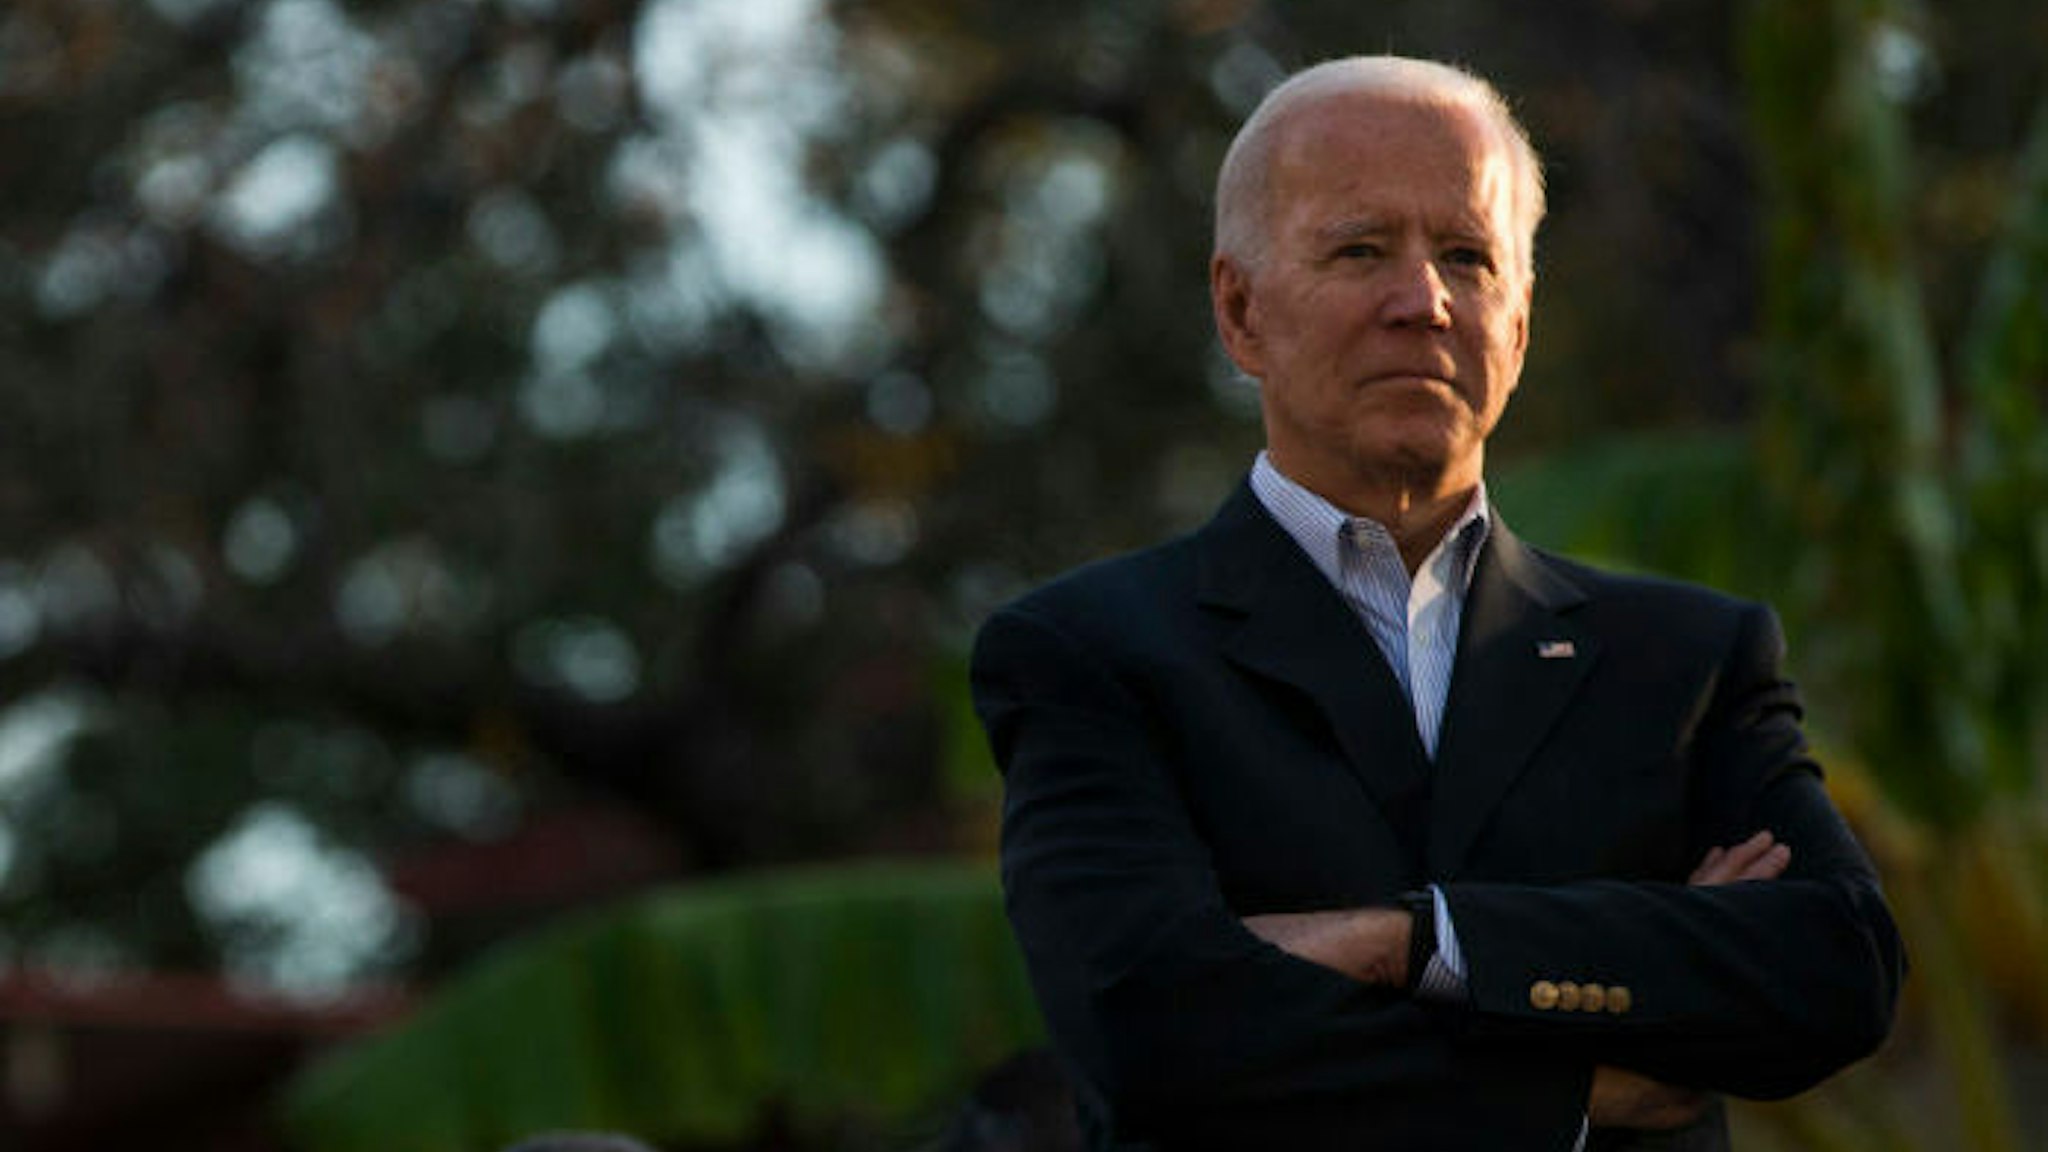 Democratic presidential candidate and former U.S. Vice President Joe Biden listens while he is introduced at a community event while campaigning on December 13, 2019 in San Antonio, Texas. Texas will hold its Democratic primary on March 3, 2020, also known as Super Tuesday. (Photo by Daniel Carde/Getty Images)